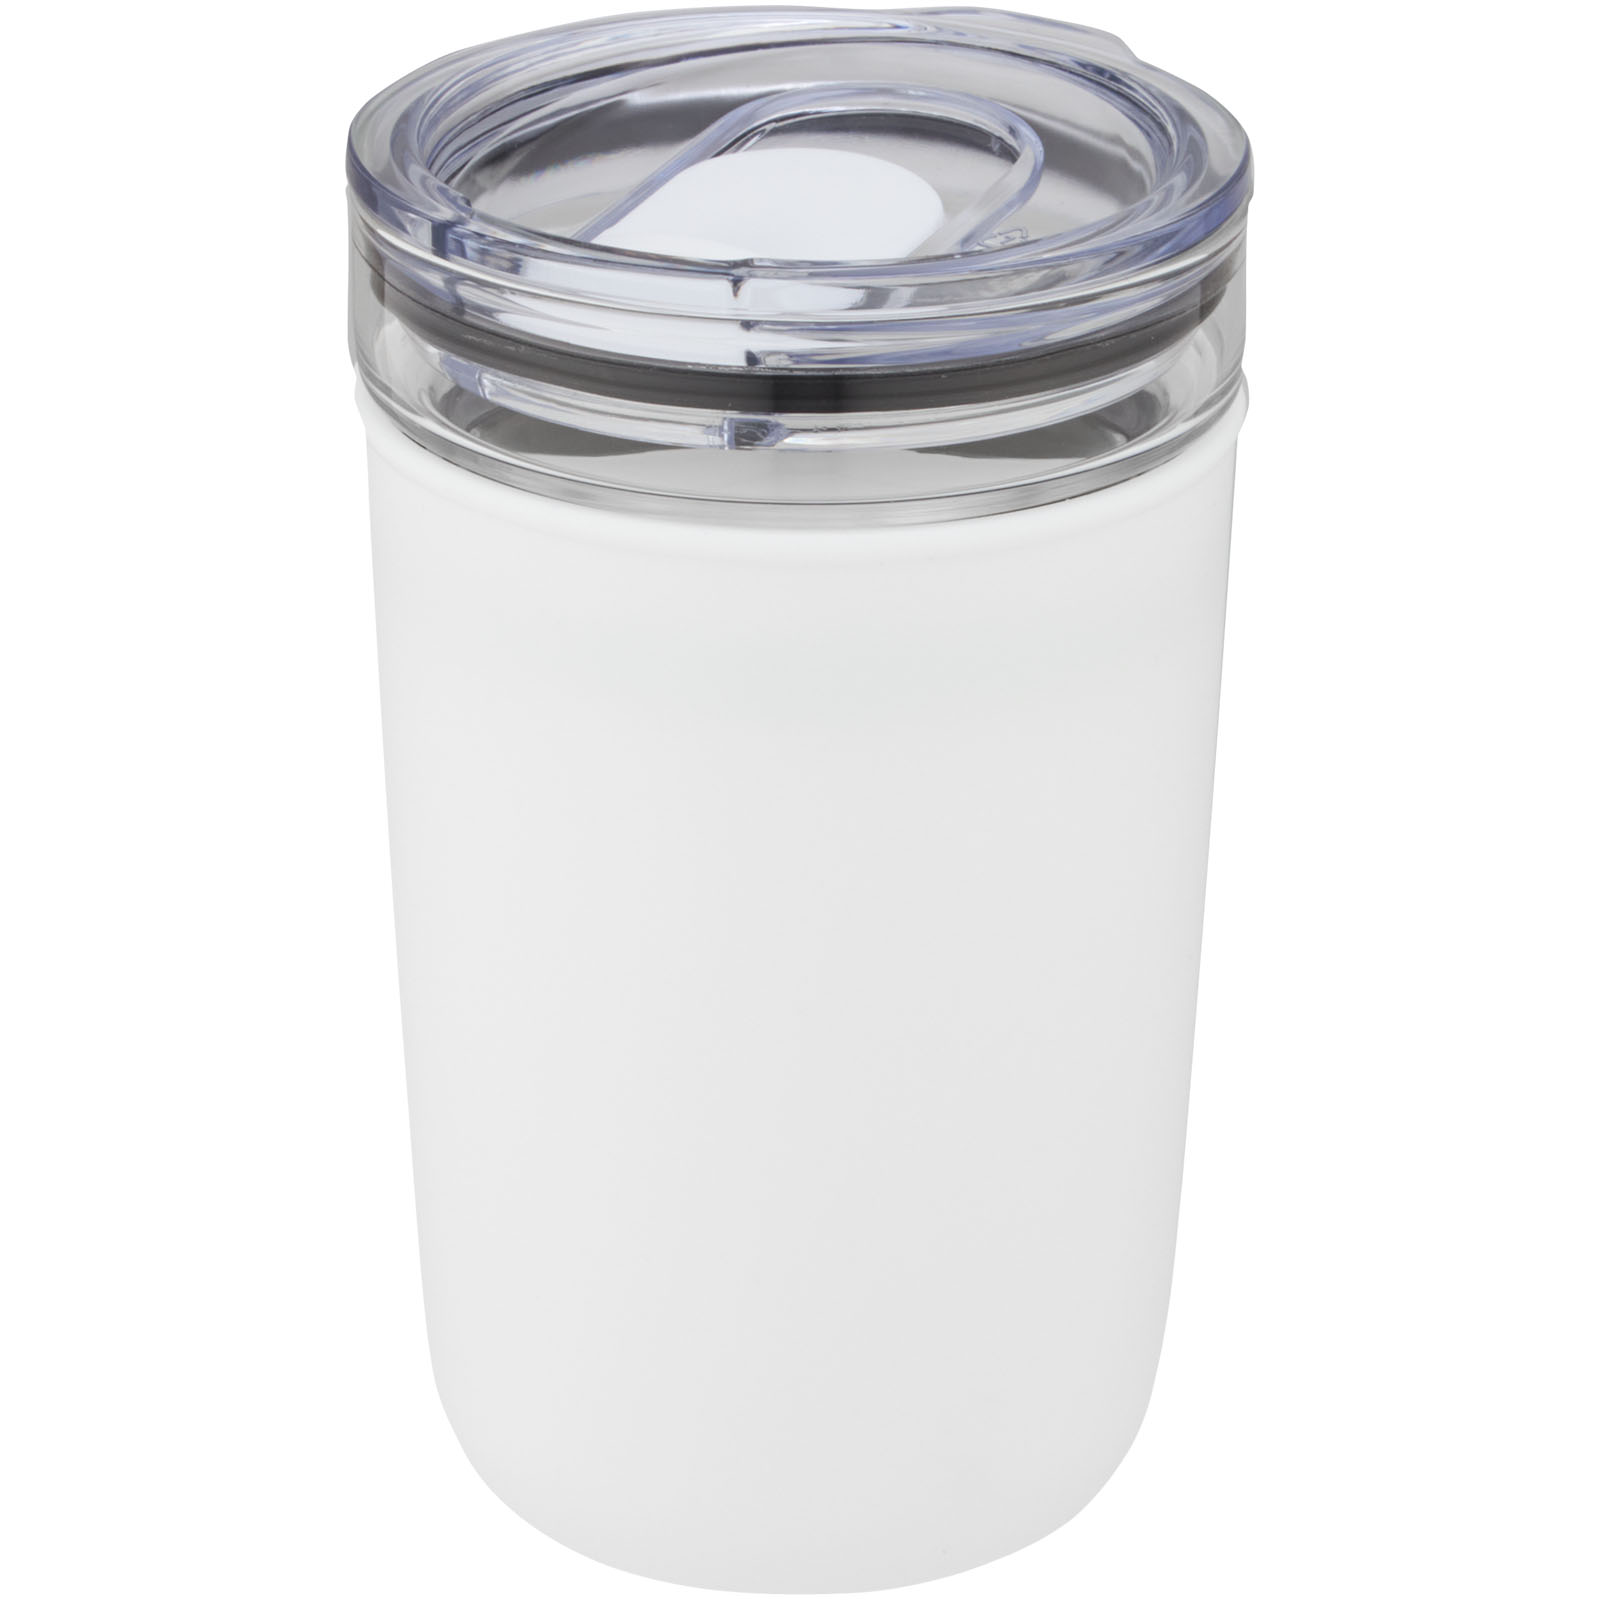 Drinkware - Bello 420 ml glass tumbler with recycled plastic outer wall